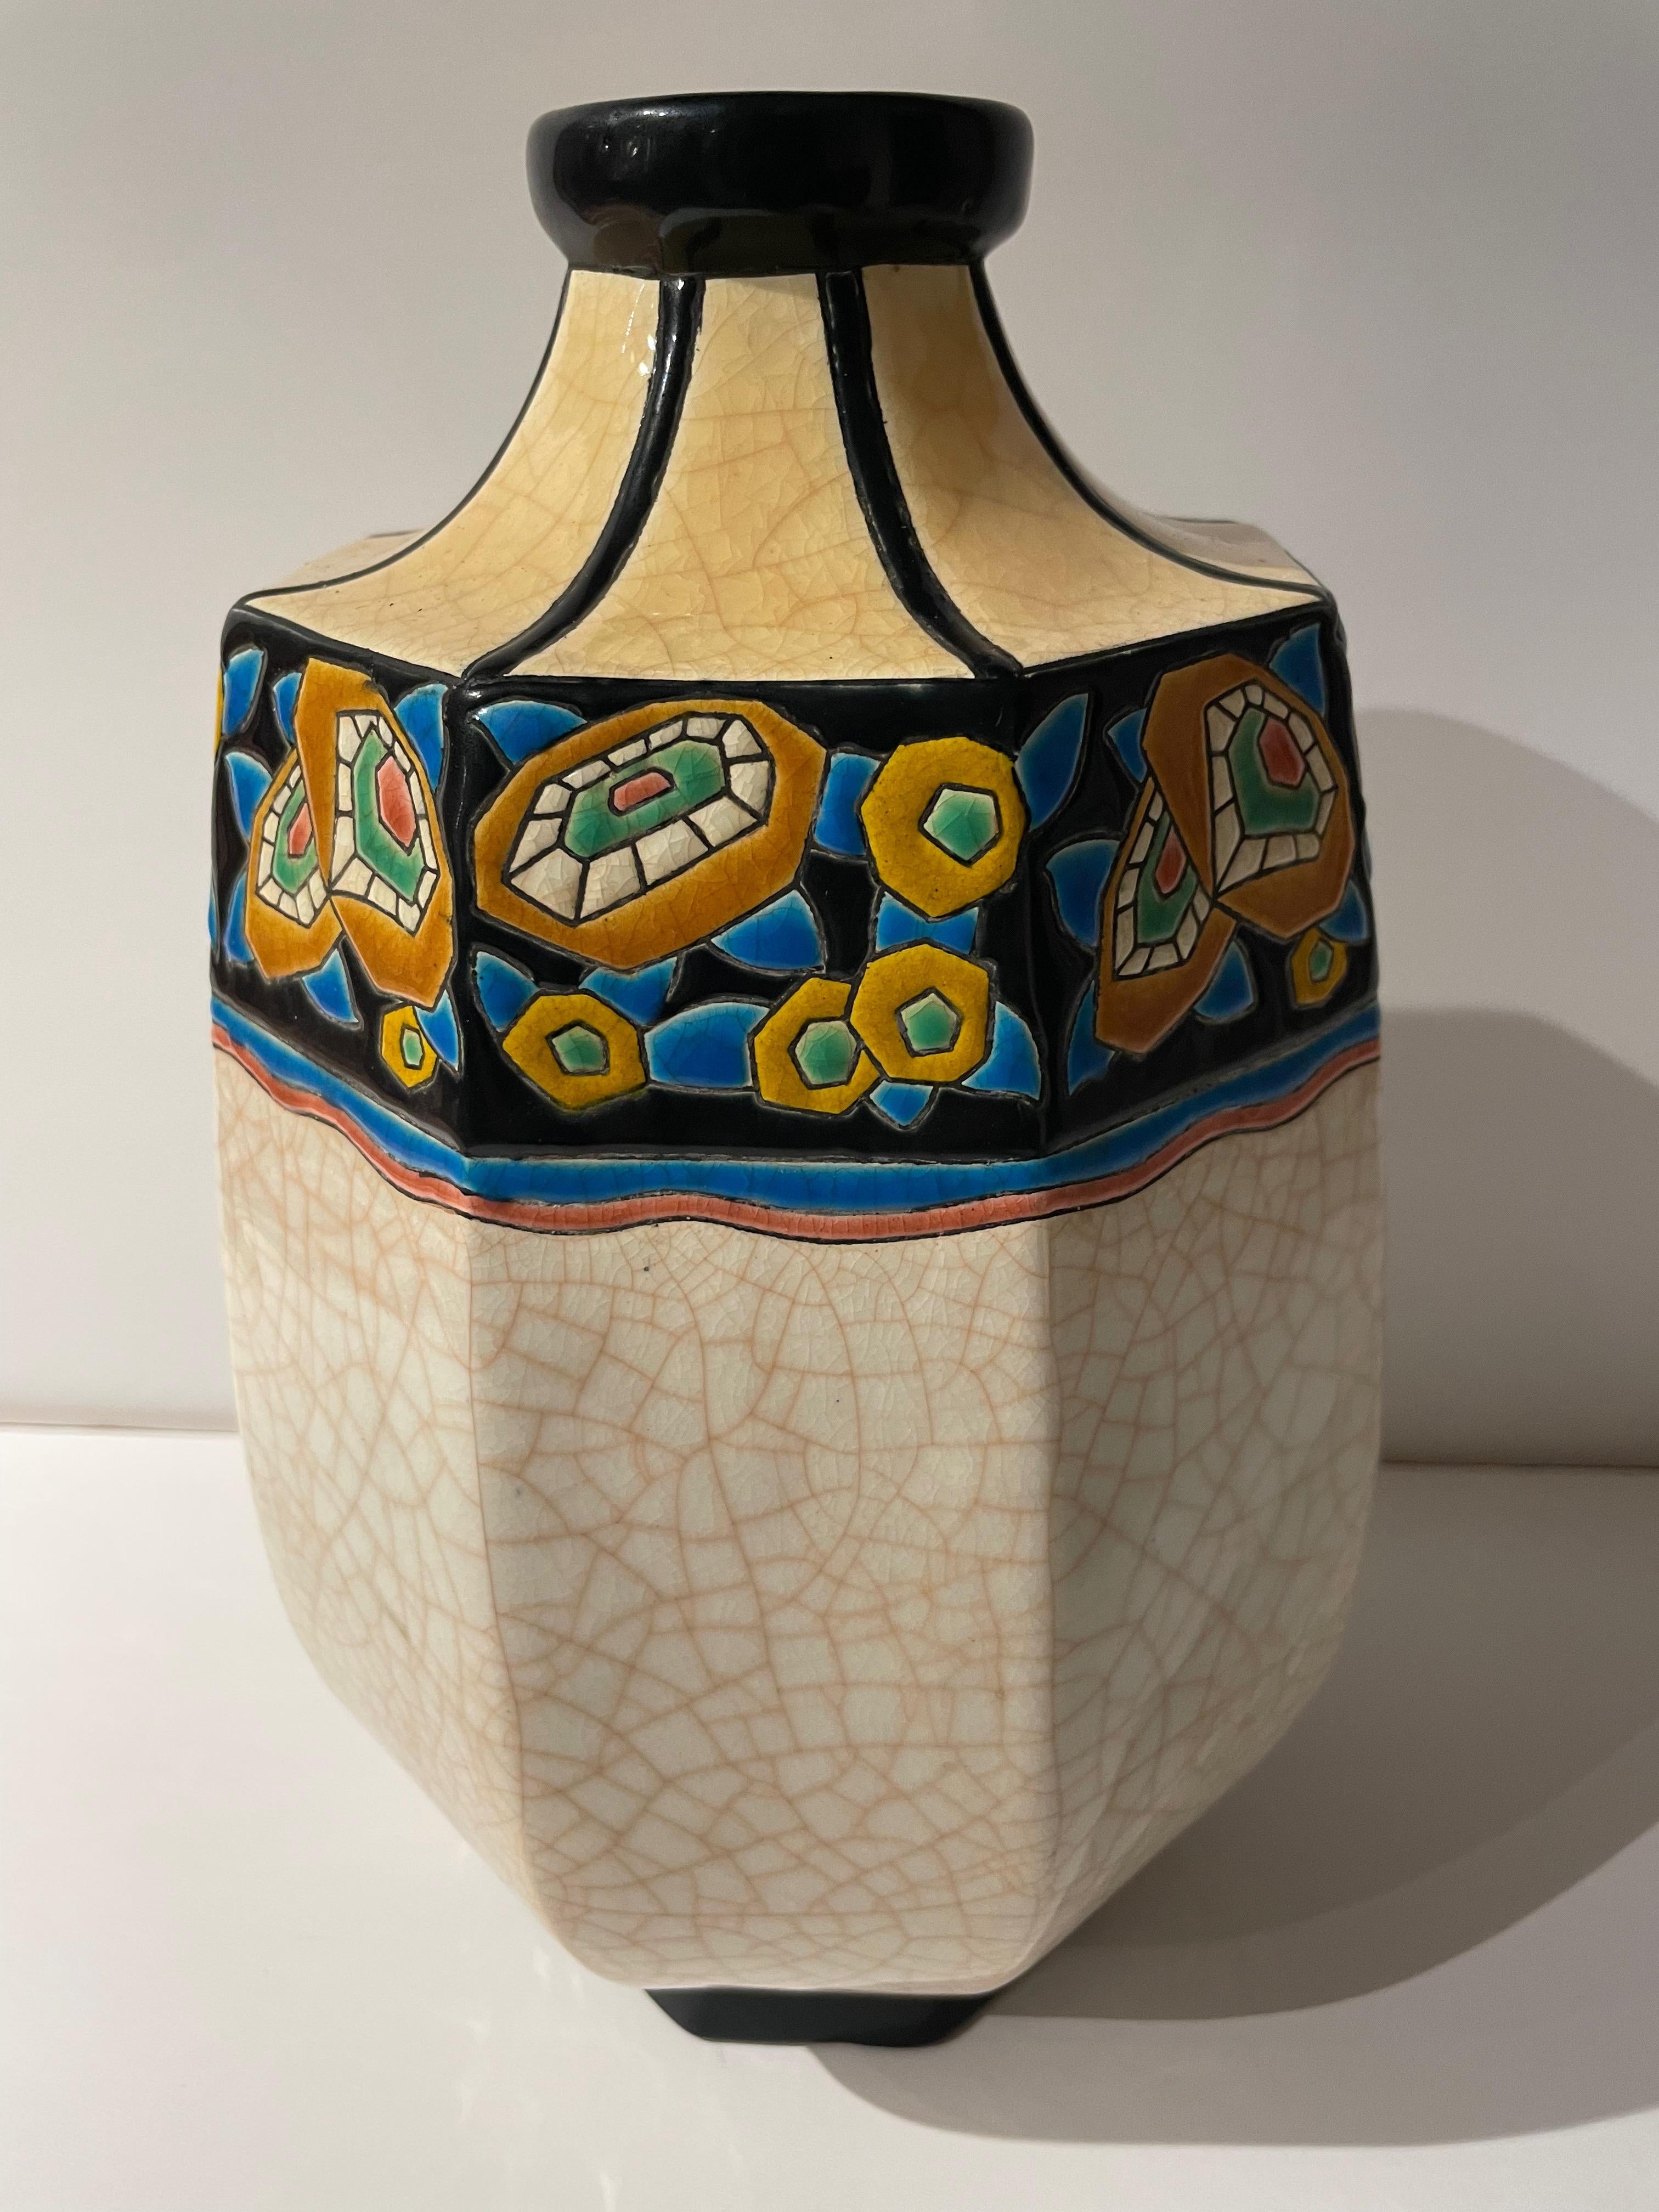 An Art Deco Vase by Longwy of France. This piece is a great example of both the craquele (crackle ) and the ceramic cloisonné techniques. It’s octagon shape presents eight panels decorated in geometric, stylized flowers.

Longwy is the name of a